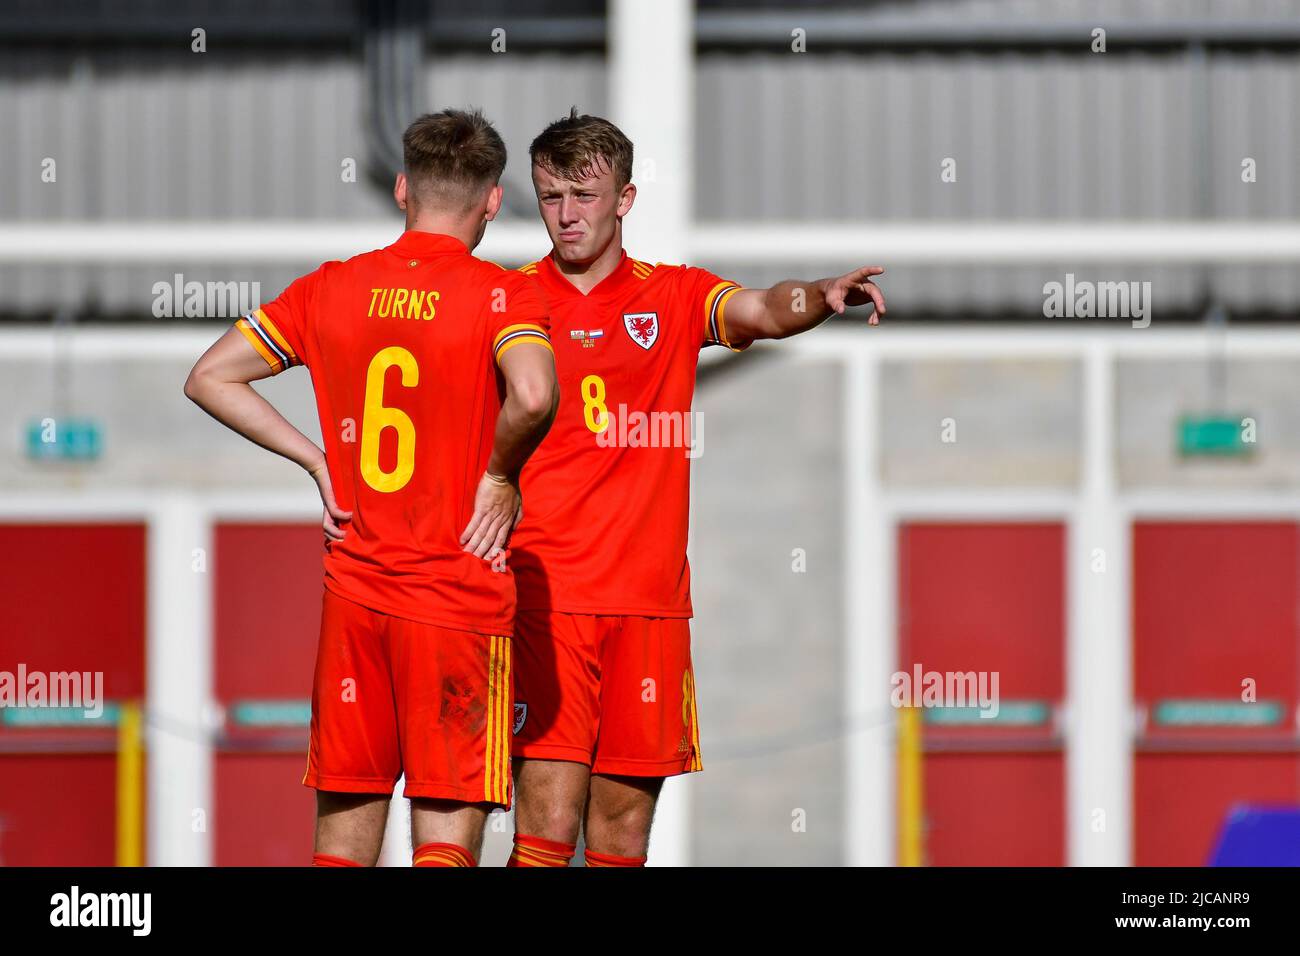 Llanelli, Wales. 11 June, 2022. Eli King of Wales U21 (right) talks to team mate Edward Turns of Wales U21 during the UEFA European Under-21 Championship Qualifier Group E match between between Wales U21 and Netherlands U21 at Parc y Scarlets in Llanelli, Wales, UK on 11, June 2022. Credit: Duncan Thomas/Majestic Media. Stock Photo